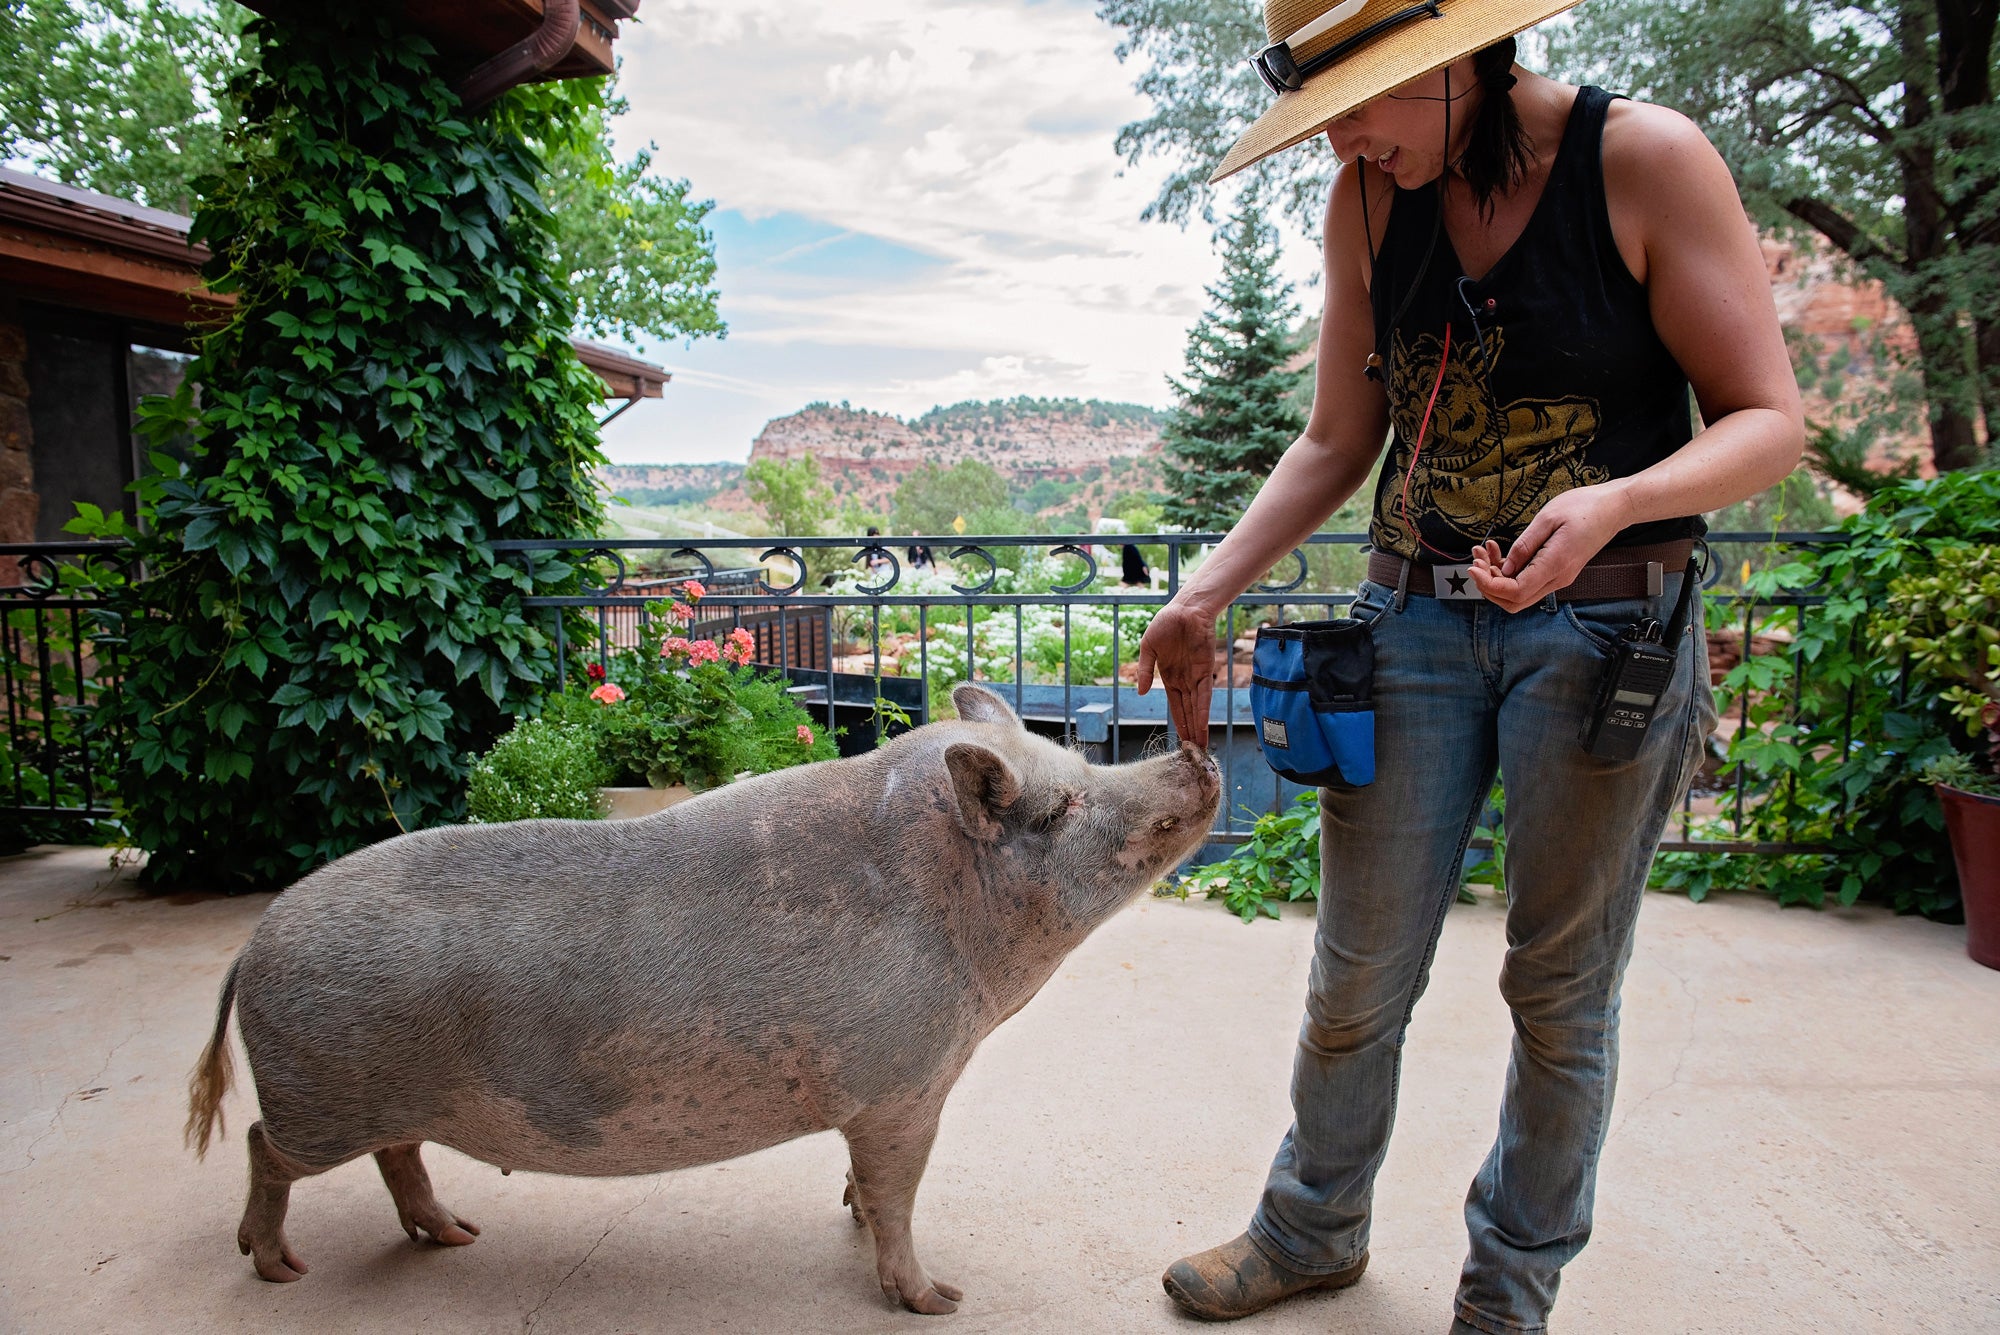 Person petting a pig on its nose in front of red rock canyon view